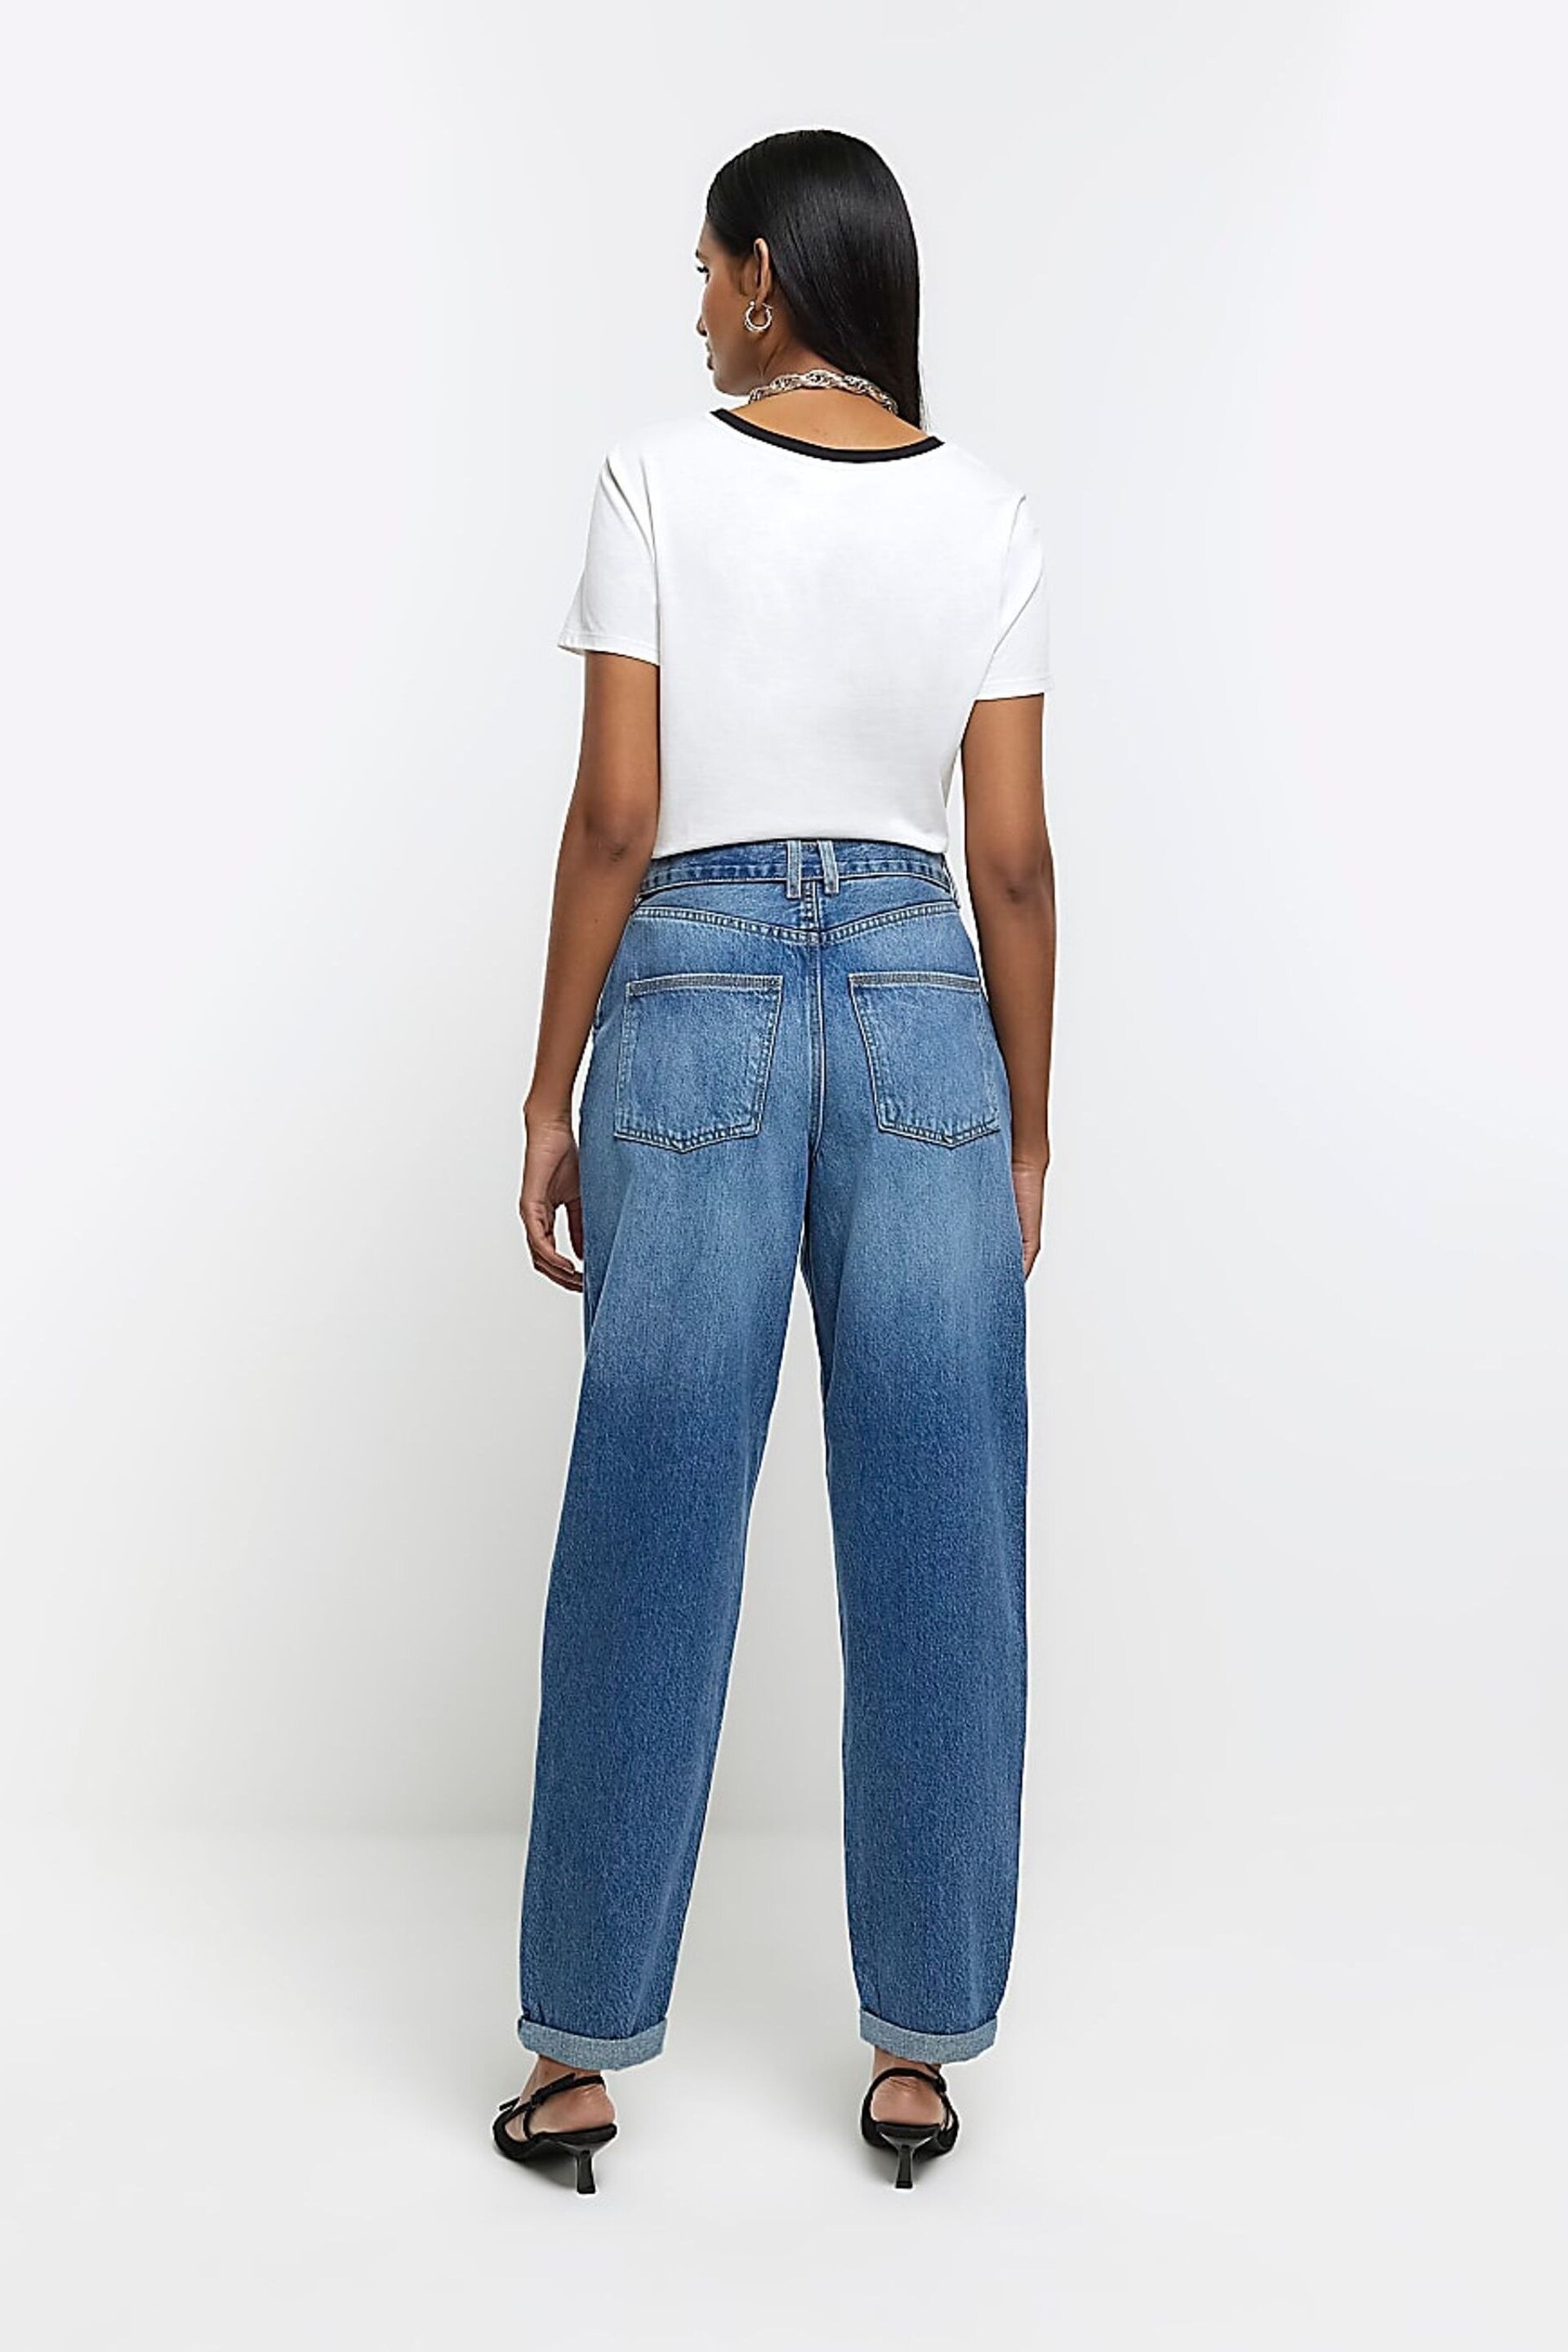 River Island Blue High Rise Relaxed Pleated Barrel Belted Jeans - Image 2 of 6